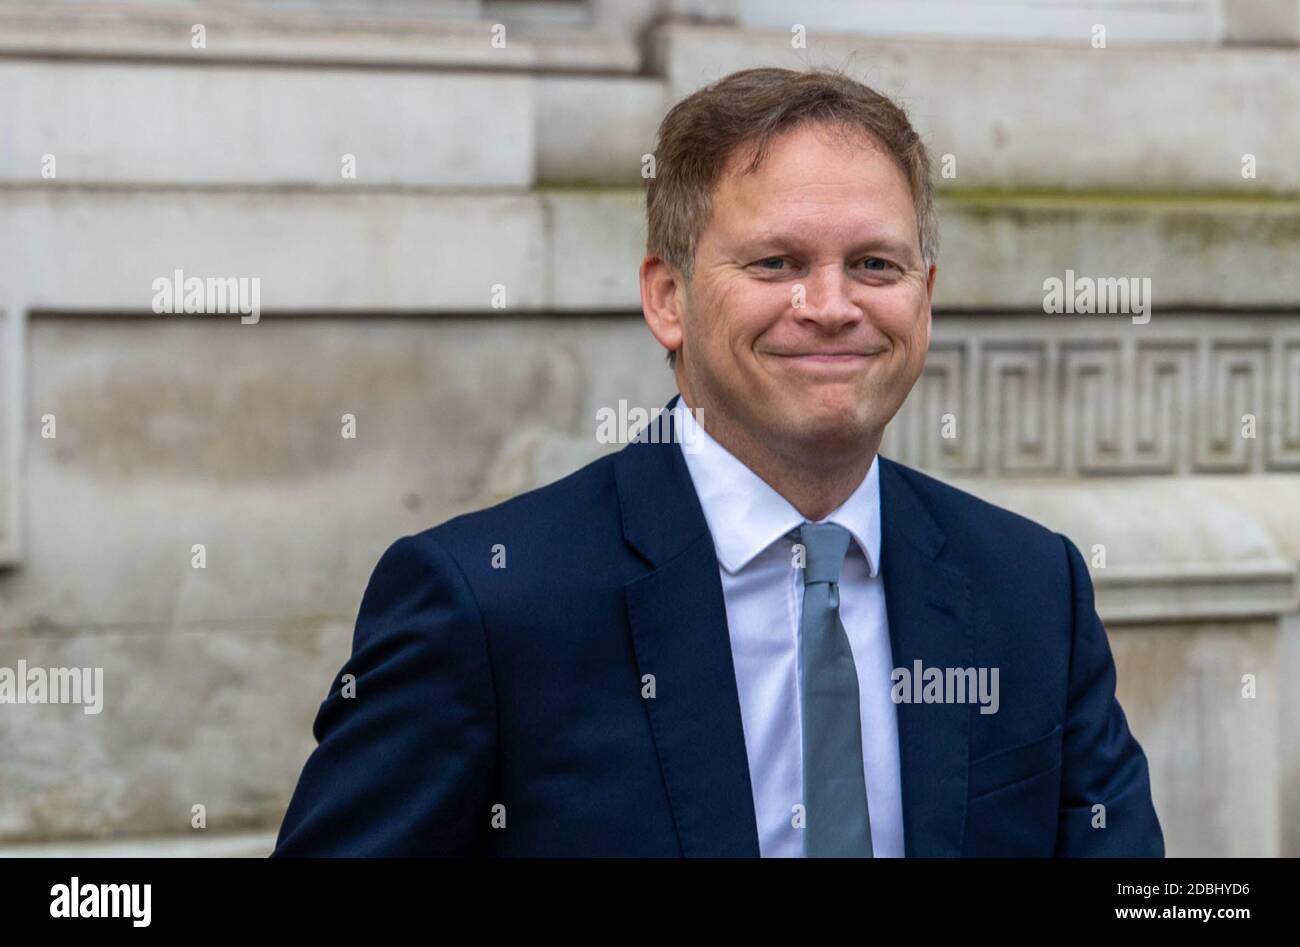 London, UK. 17th Nov, 2020. Grant Shapps Secretary of State for Transport since 2019 leaves the Cabinet Office in Whitehall. Shapps also has Cabinet responsibility for the Northern Powerhouse. A member of the Conservative Party, he has been the Member of Parliament (MP) for Welwyn Hatfield since the 2005 general election. Credit: Ian Davidson/Alamy Live News Stock Photo